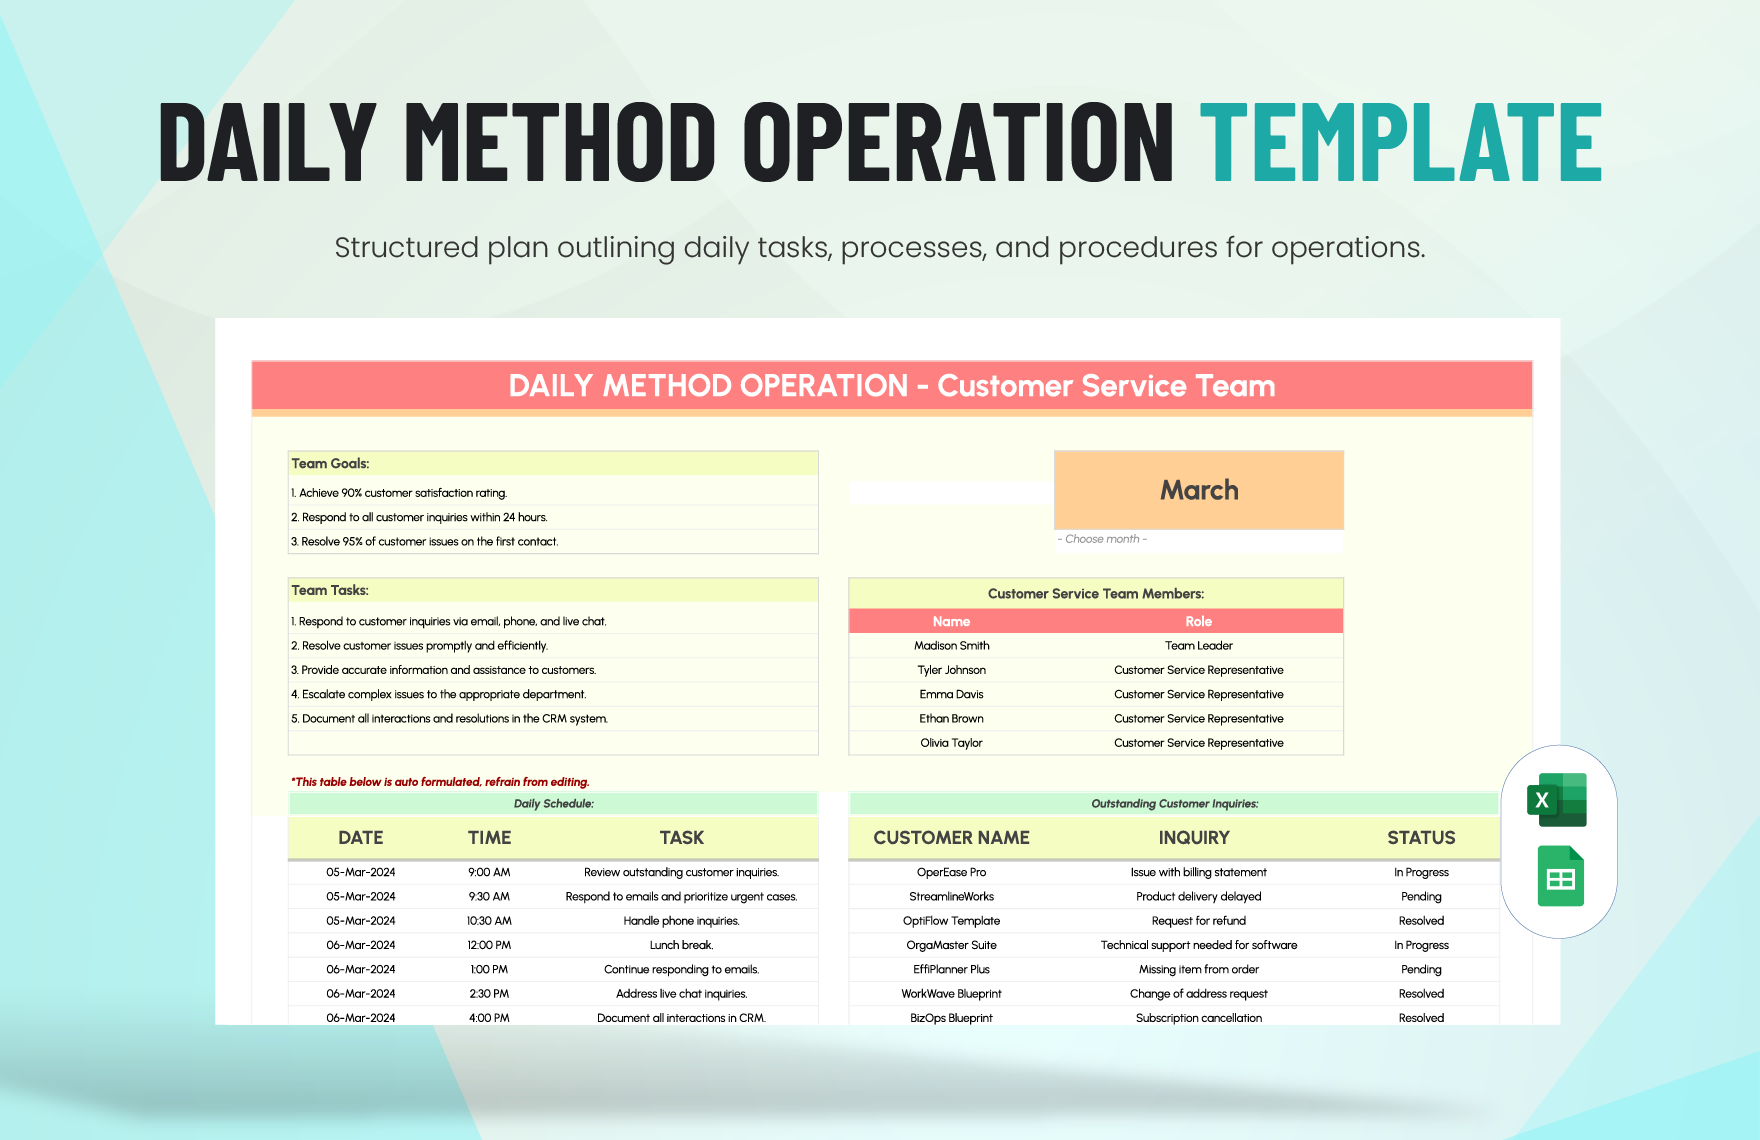 Daily Method Operation Template